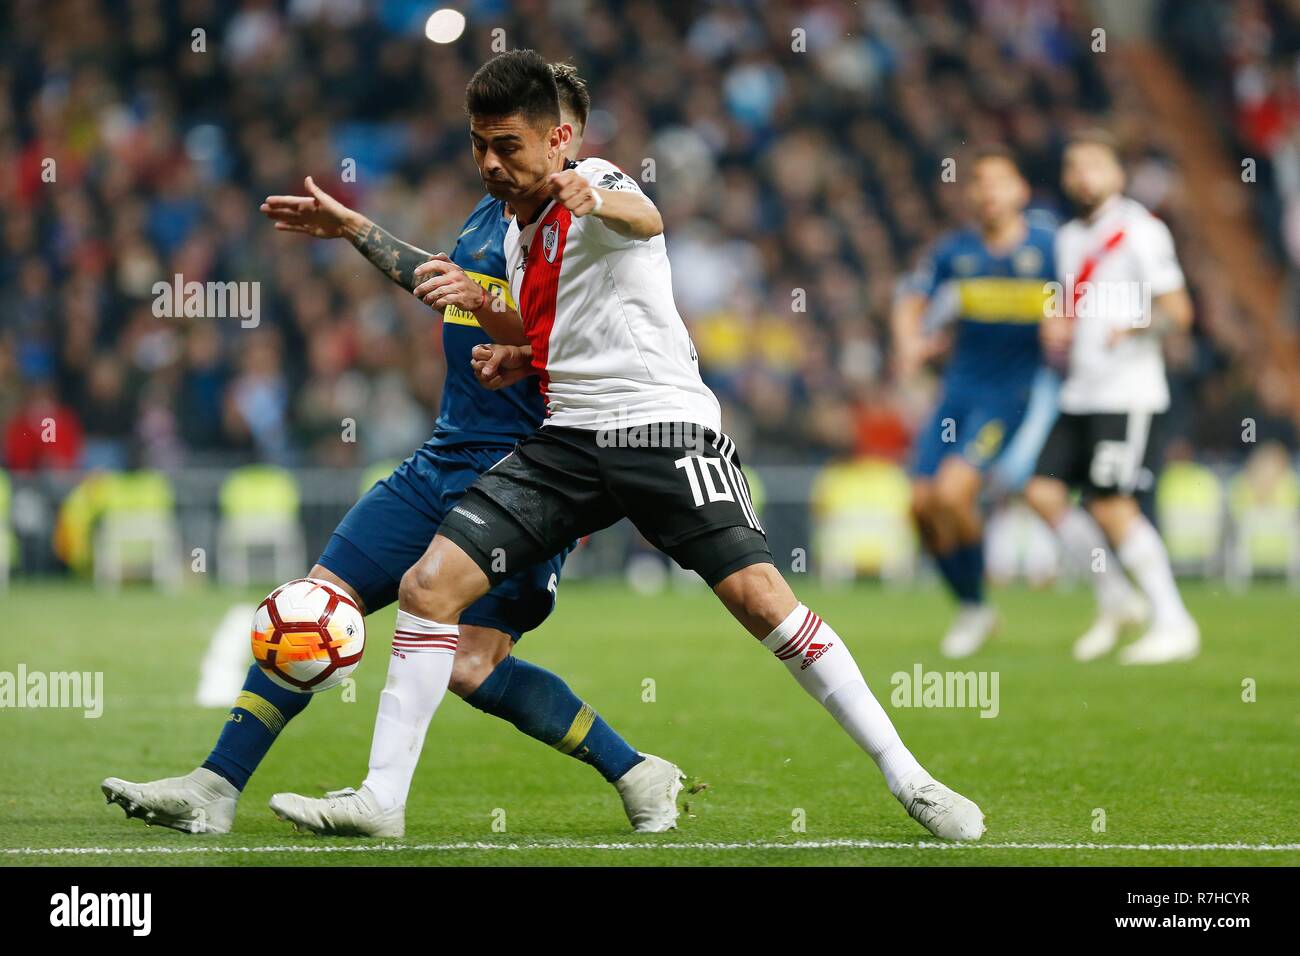 Madrid, Spain. 9th Dec, 2018. Gonzalo Nicolas Martinez of Boca Juniors in action during the second leg match between River Plate and Boca Juniors as part of the Finals of Copa CONMEBOL Libertadores 2018 at Estadio Santiago Bernabeu in Madrid.River Plate won the title of Copa Libertadores 2018 by beating Boca Juniors. Credit: Manu Reino/SOPA Images/ZUMA Wire/Alamy Live News Stock Photo